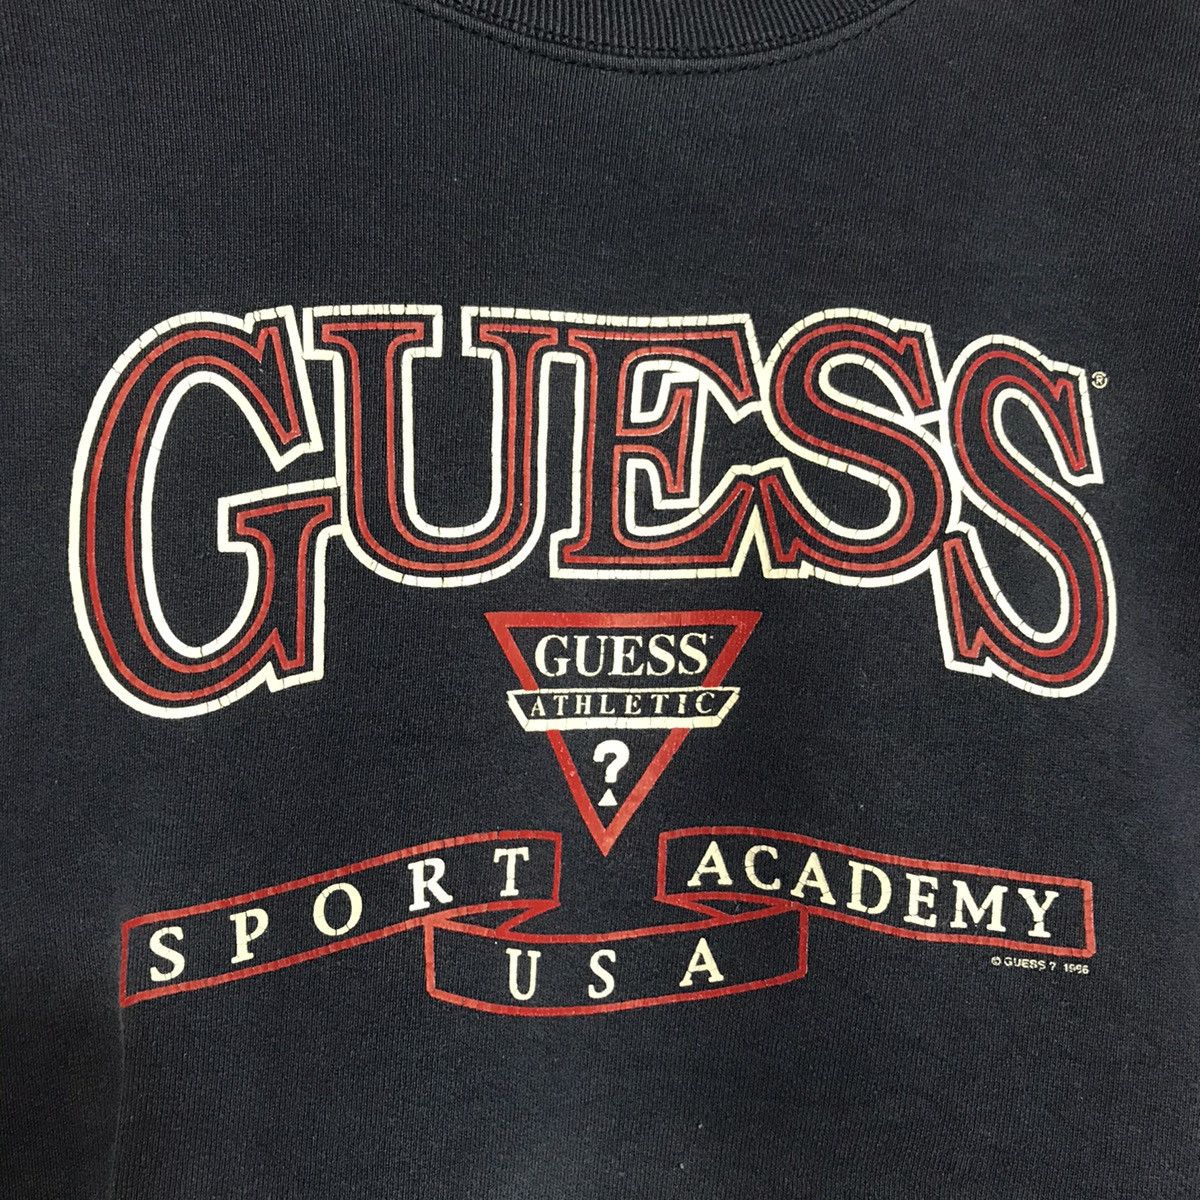 Vintage 1996 guess sweatshirt large size made in usa - 4